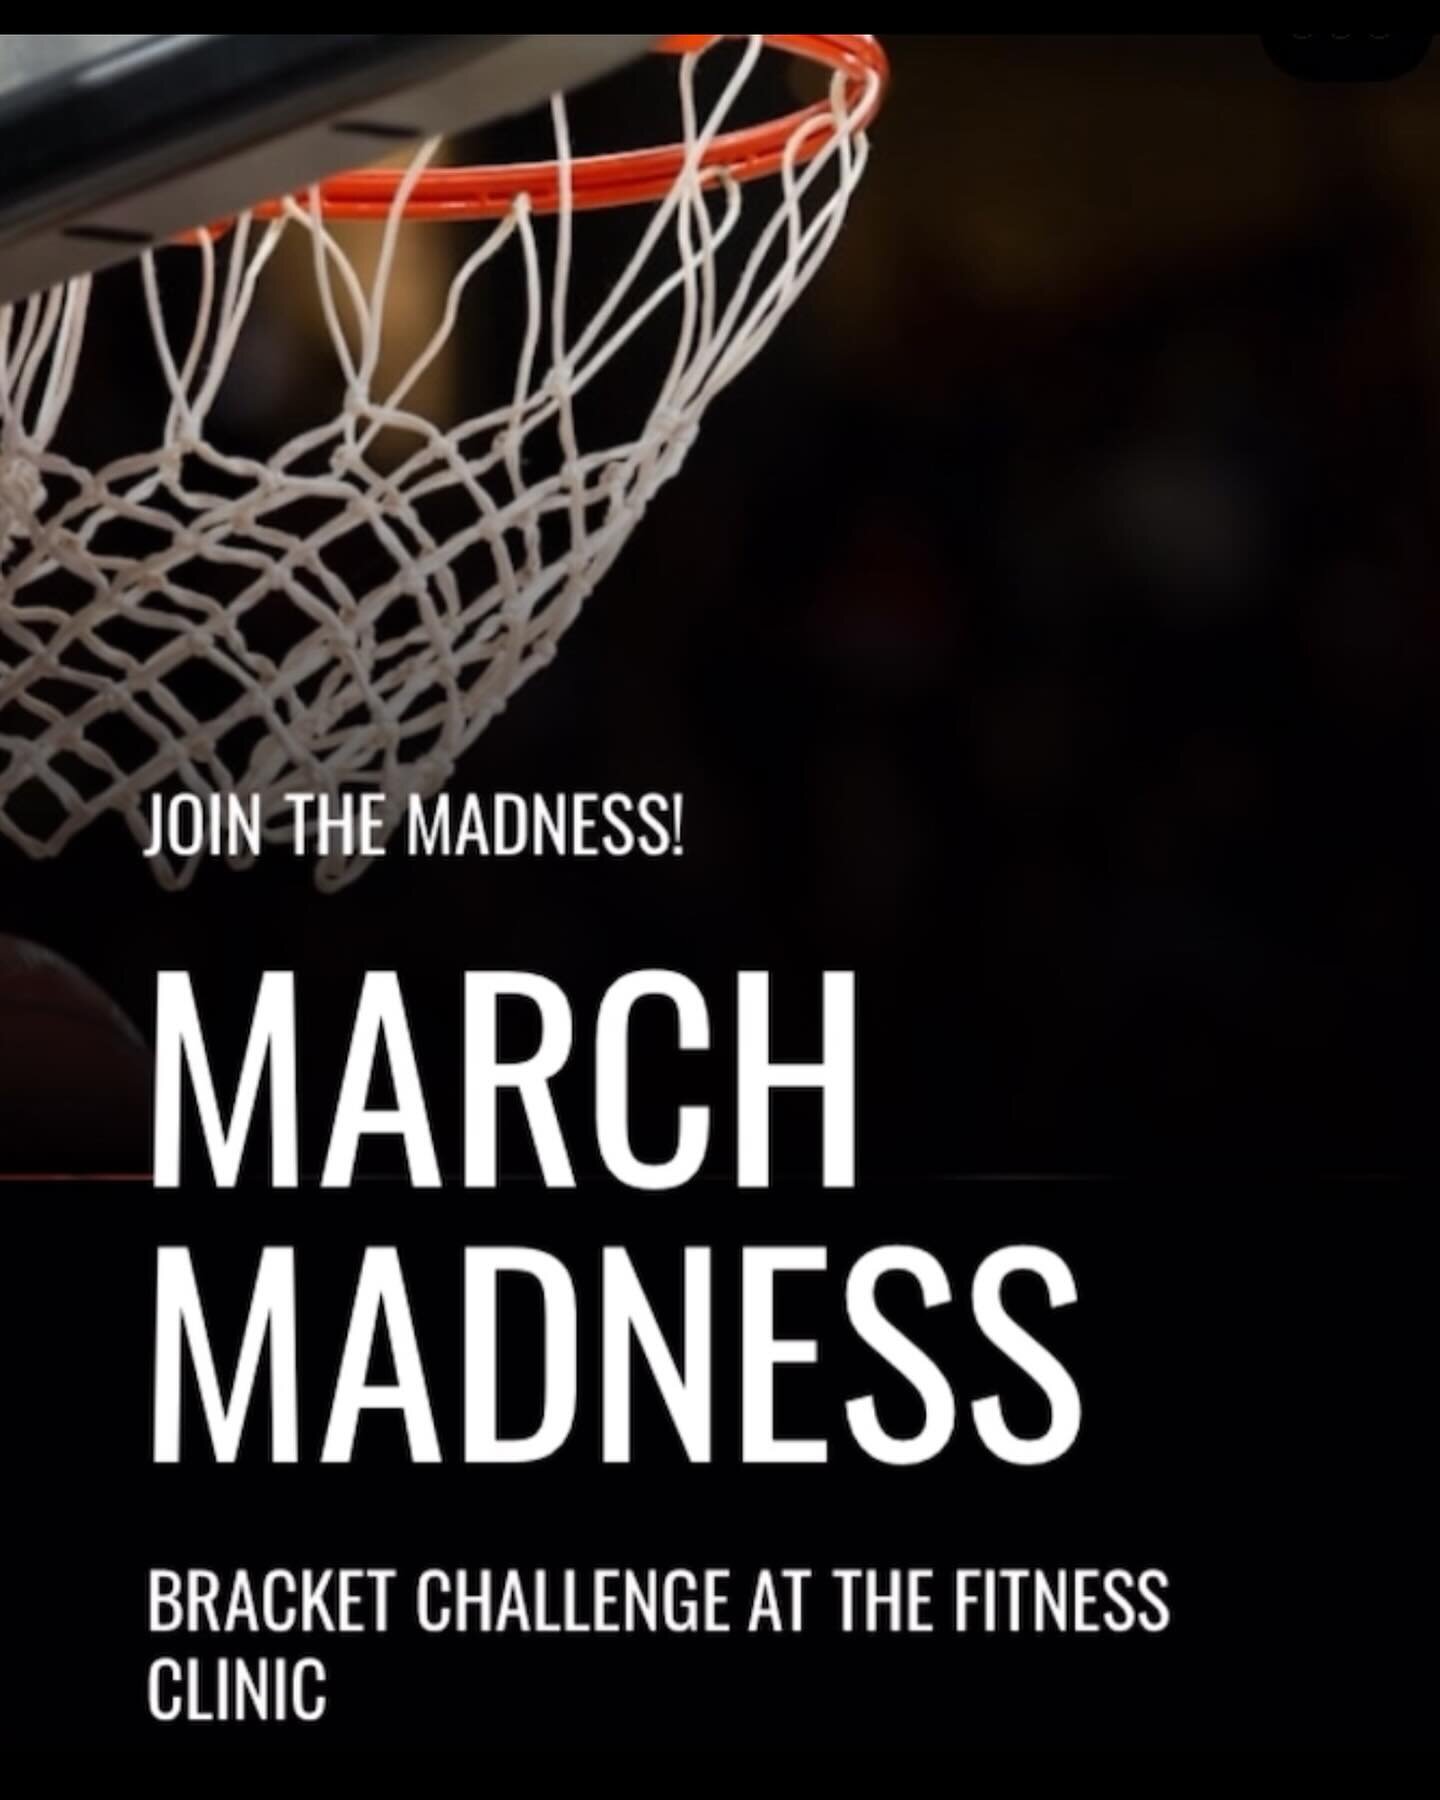 Join the bracket challenge at the Fitness Clinic. $5 to join. Winner takes all and earns bragging rights! You can bring your money in to your trainer or Venmo your $5 to &ldquo;Fitnessclinic&rdquo;.

Follow the link below or click on the link on our 